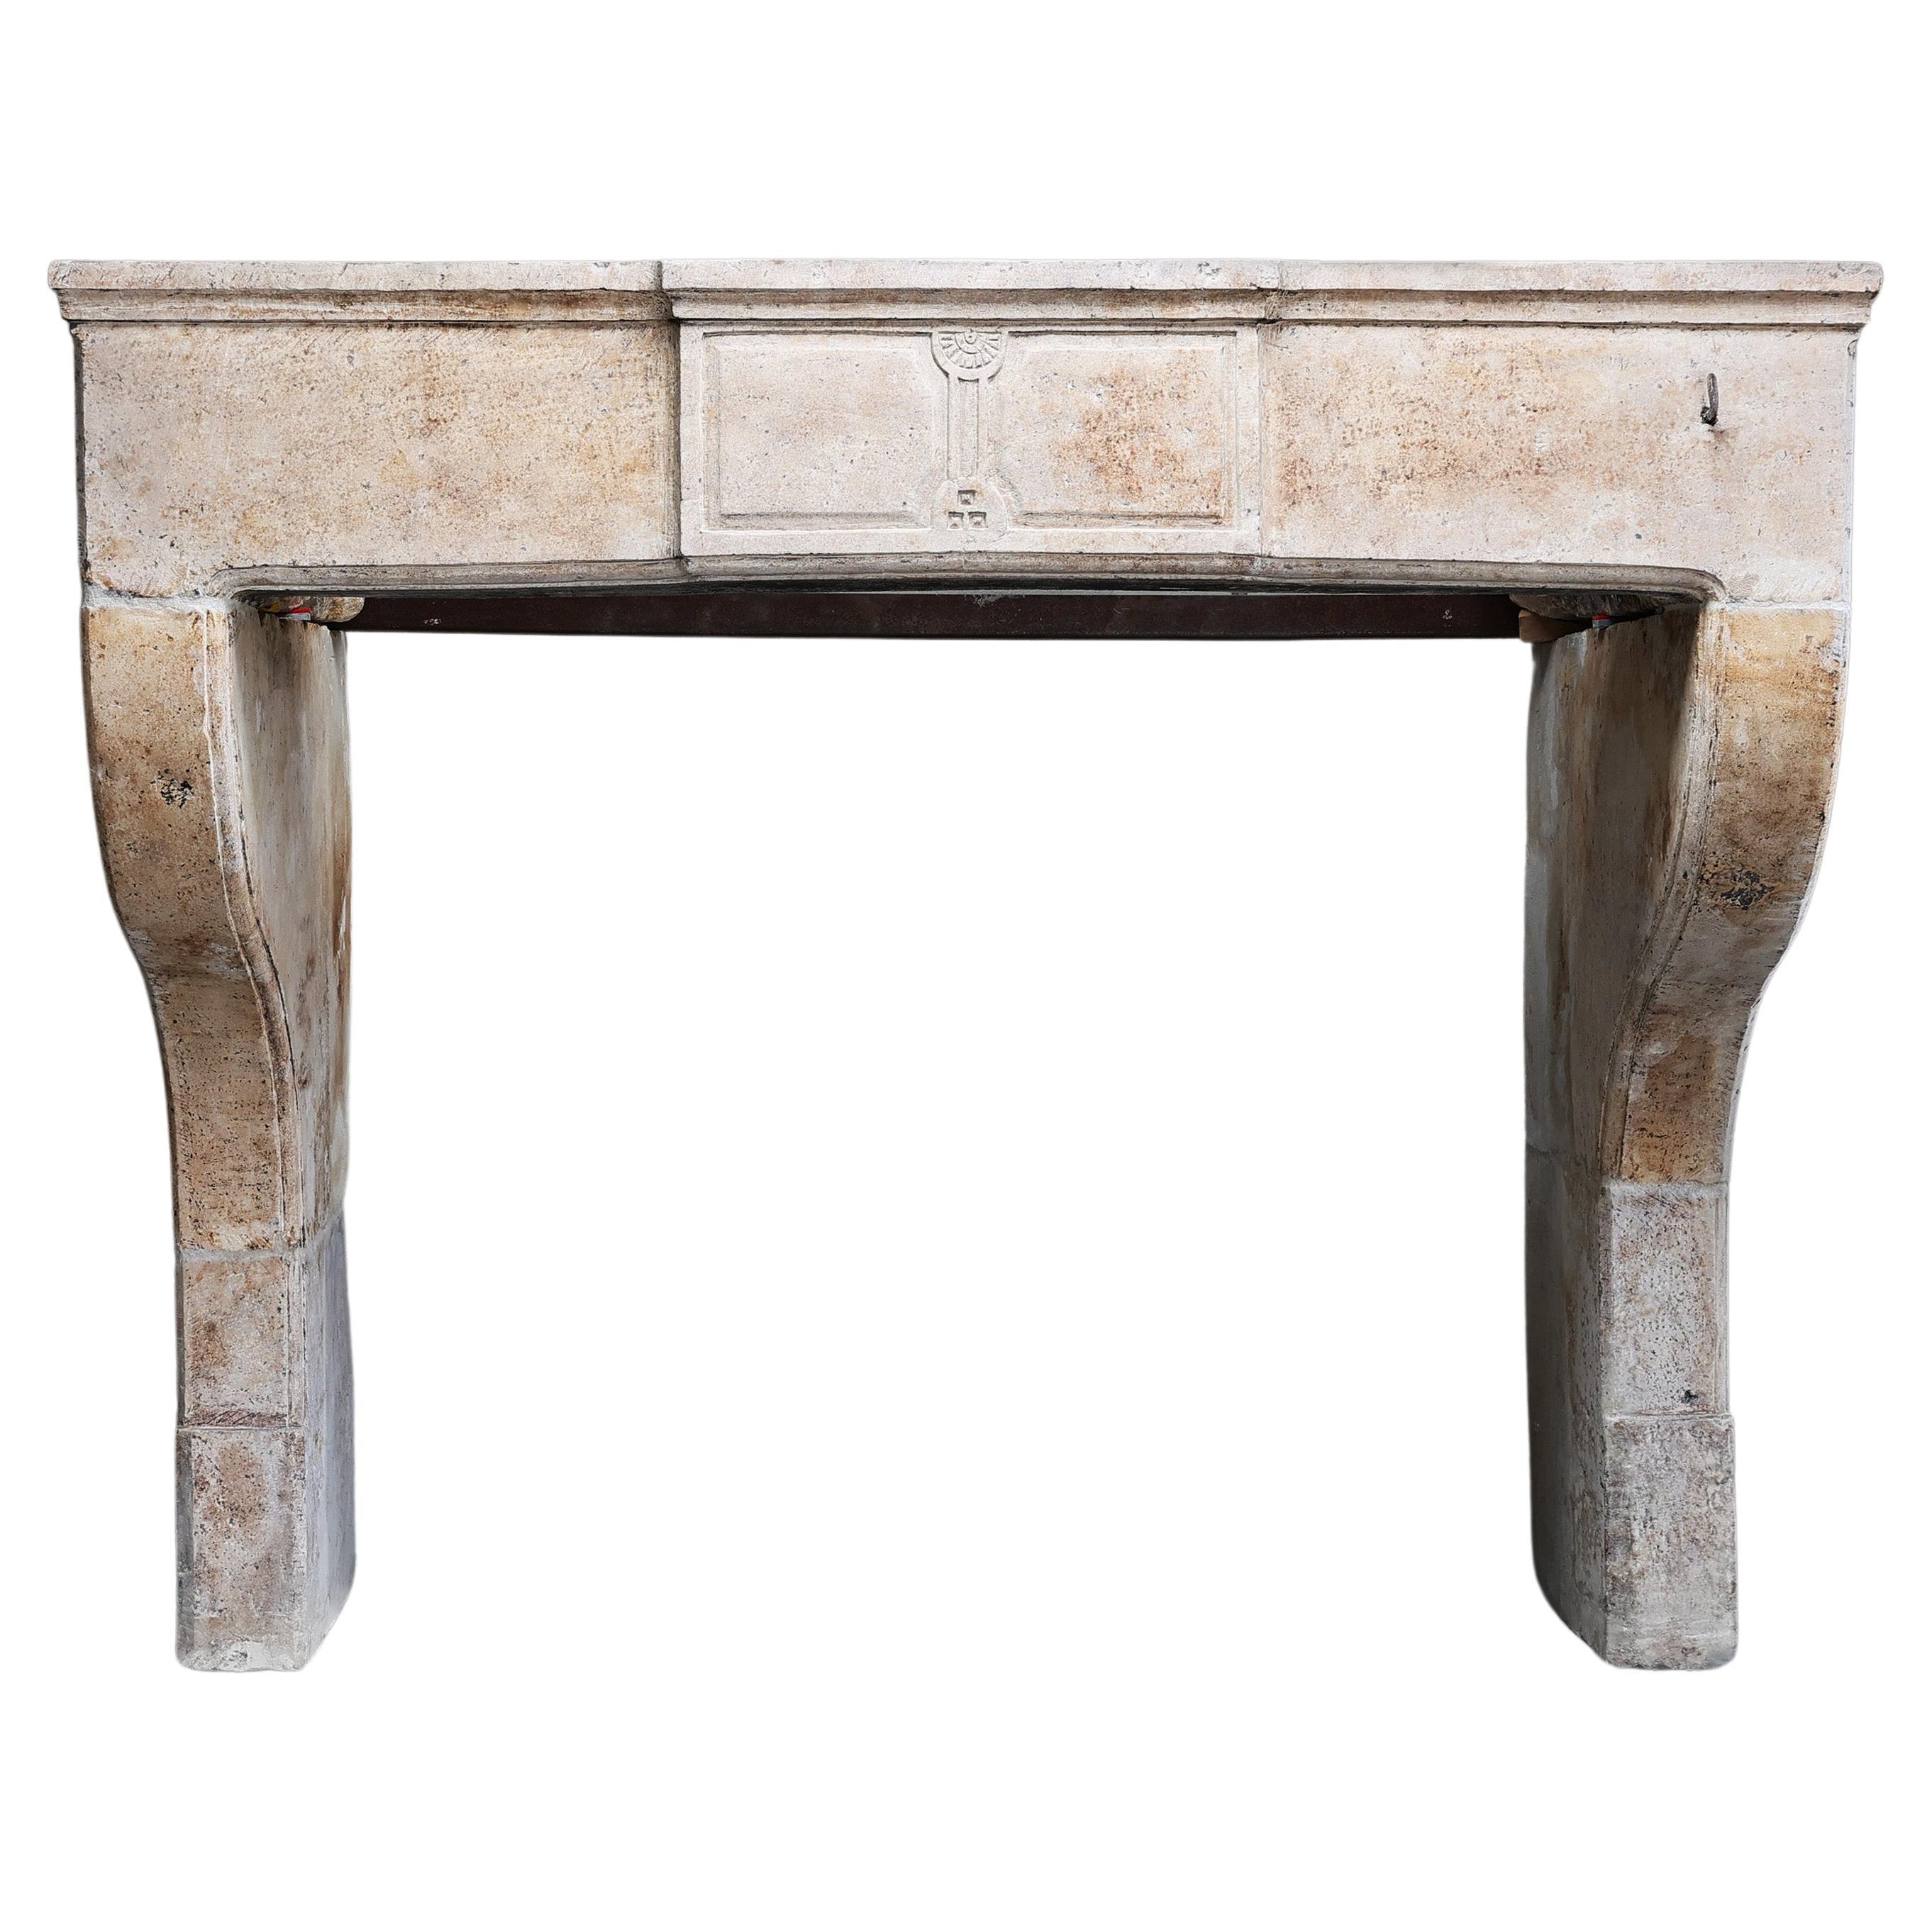 Antique Fireplace from the 19th century of french limestone 